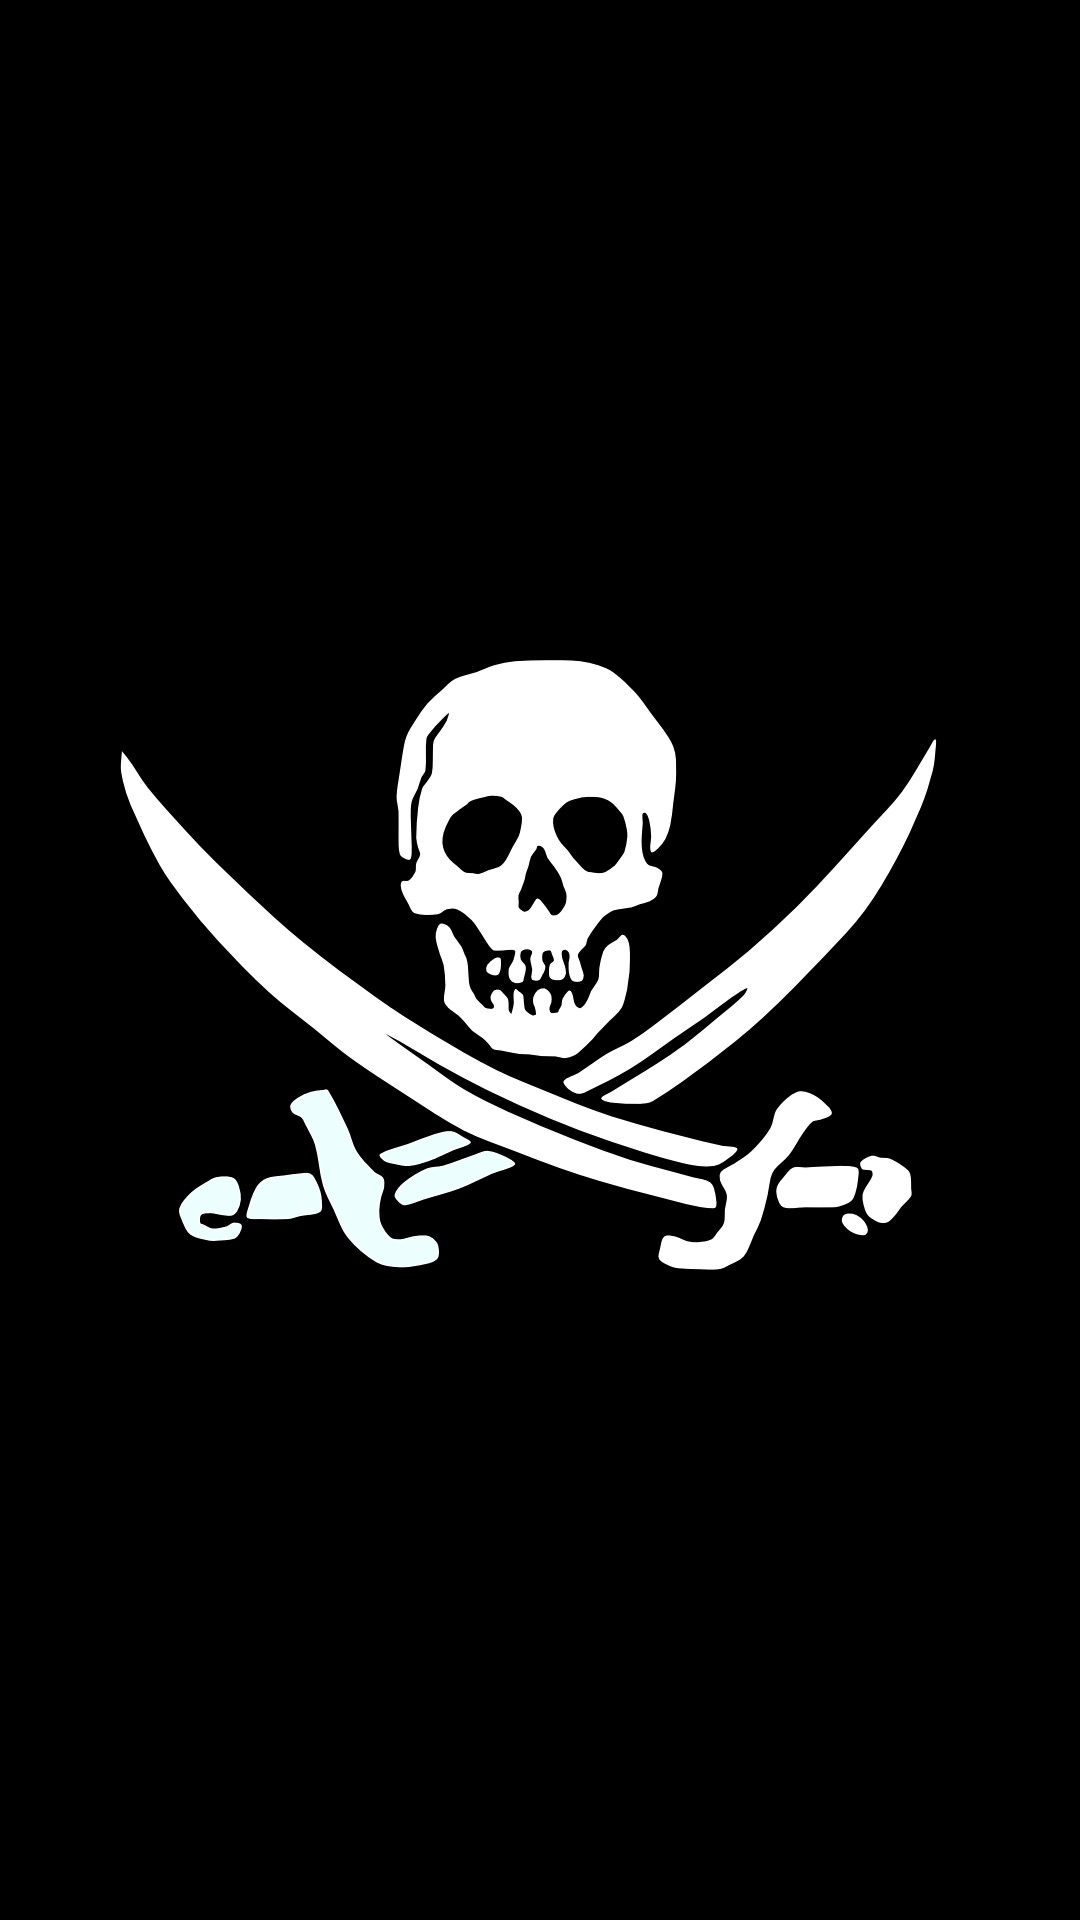 Roger Pirate Skull Black And White Android Wallpaper